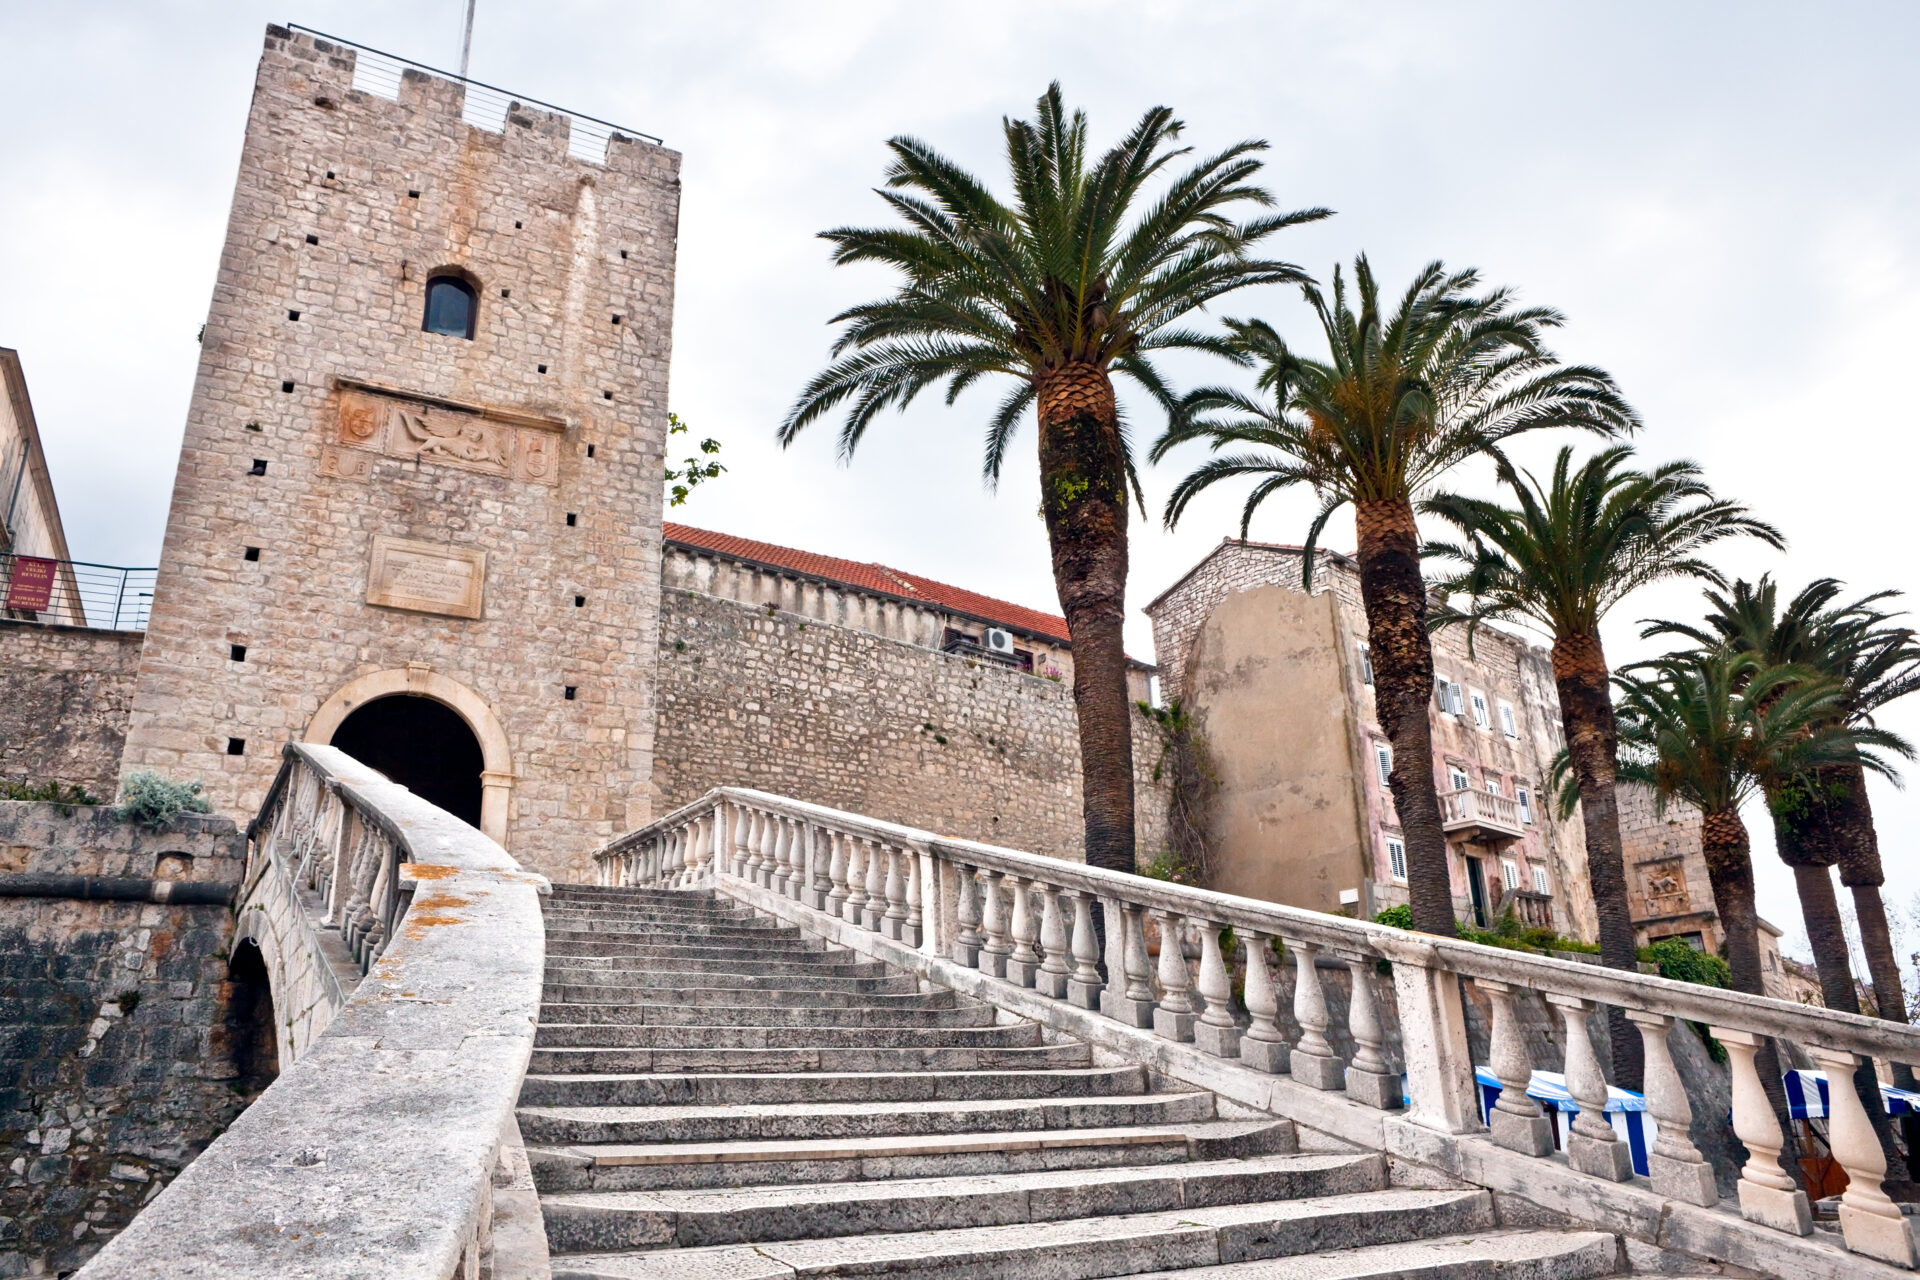 Marco Polo was born in Korcula